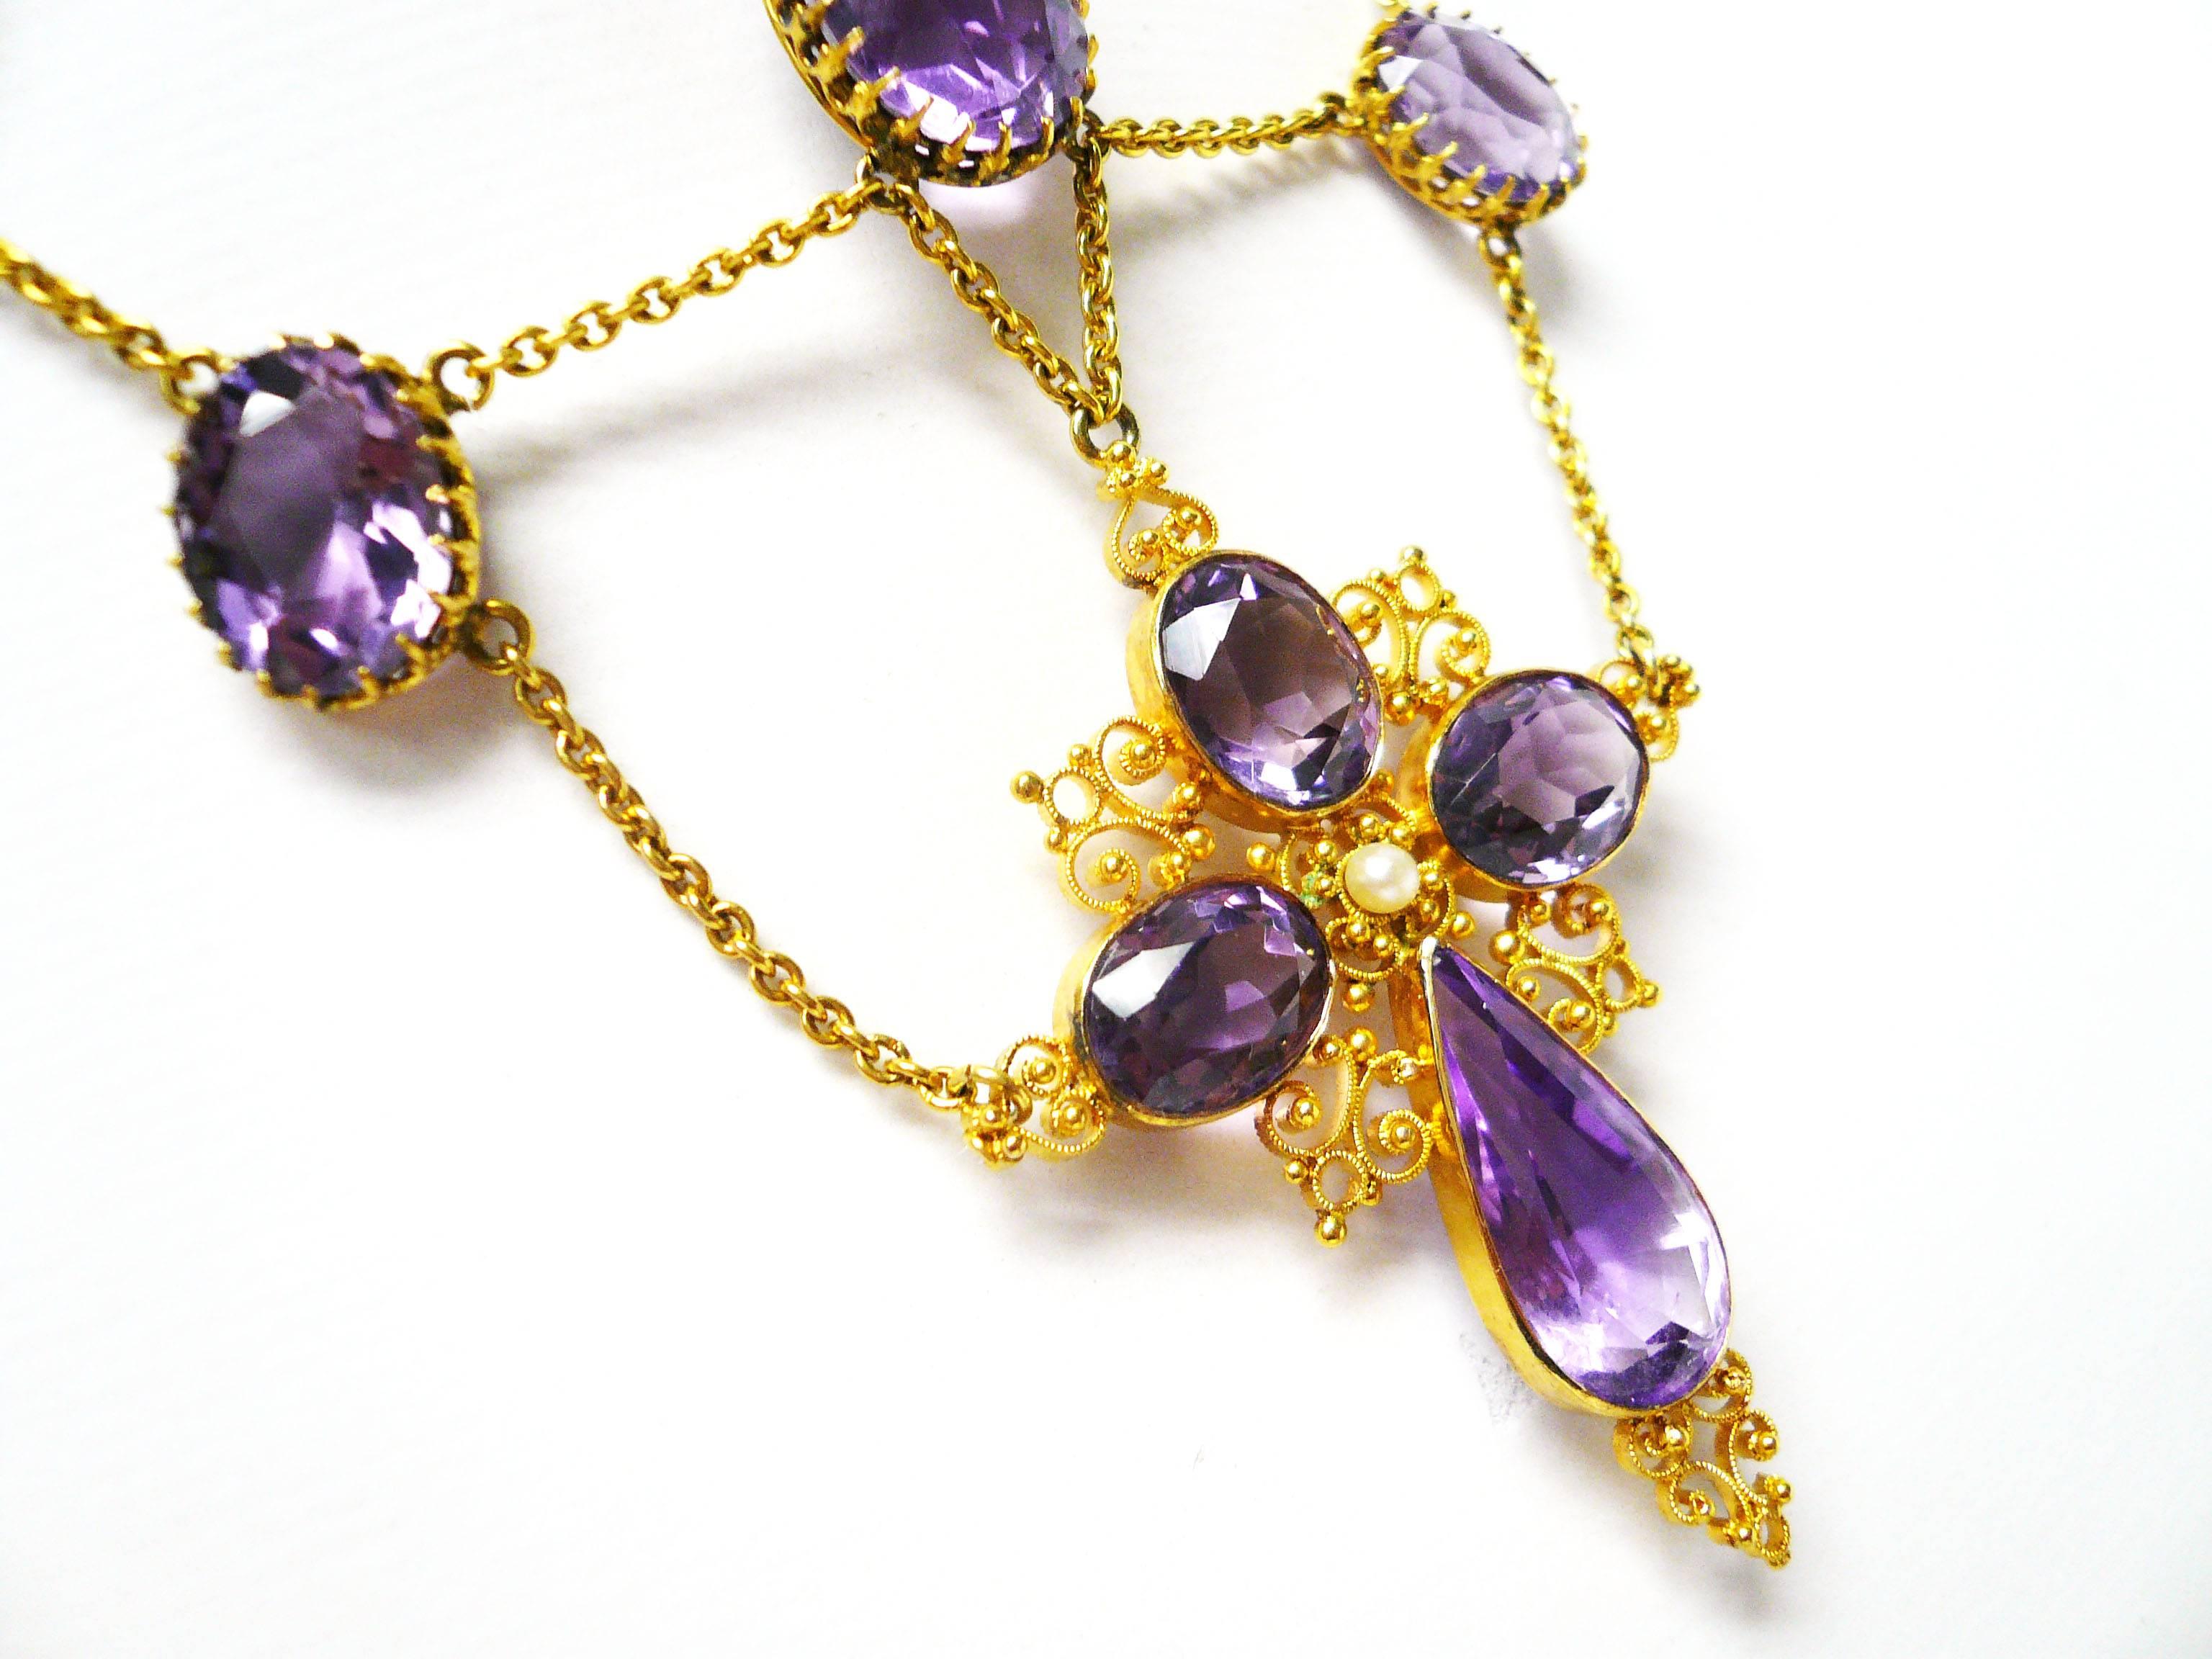 Beautiful Amethyst 14 Karat Gold Ecclesiastic Cross Swag Necklace

Amethysts were fashionable gemstones throughout the Victorian era.  This charming swag necklace features 35 carats of amethyst gemstone set in 18 karat yellow gold.  Because of its